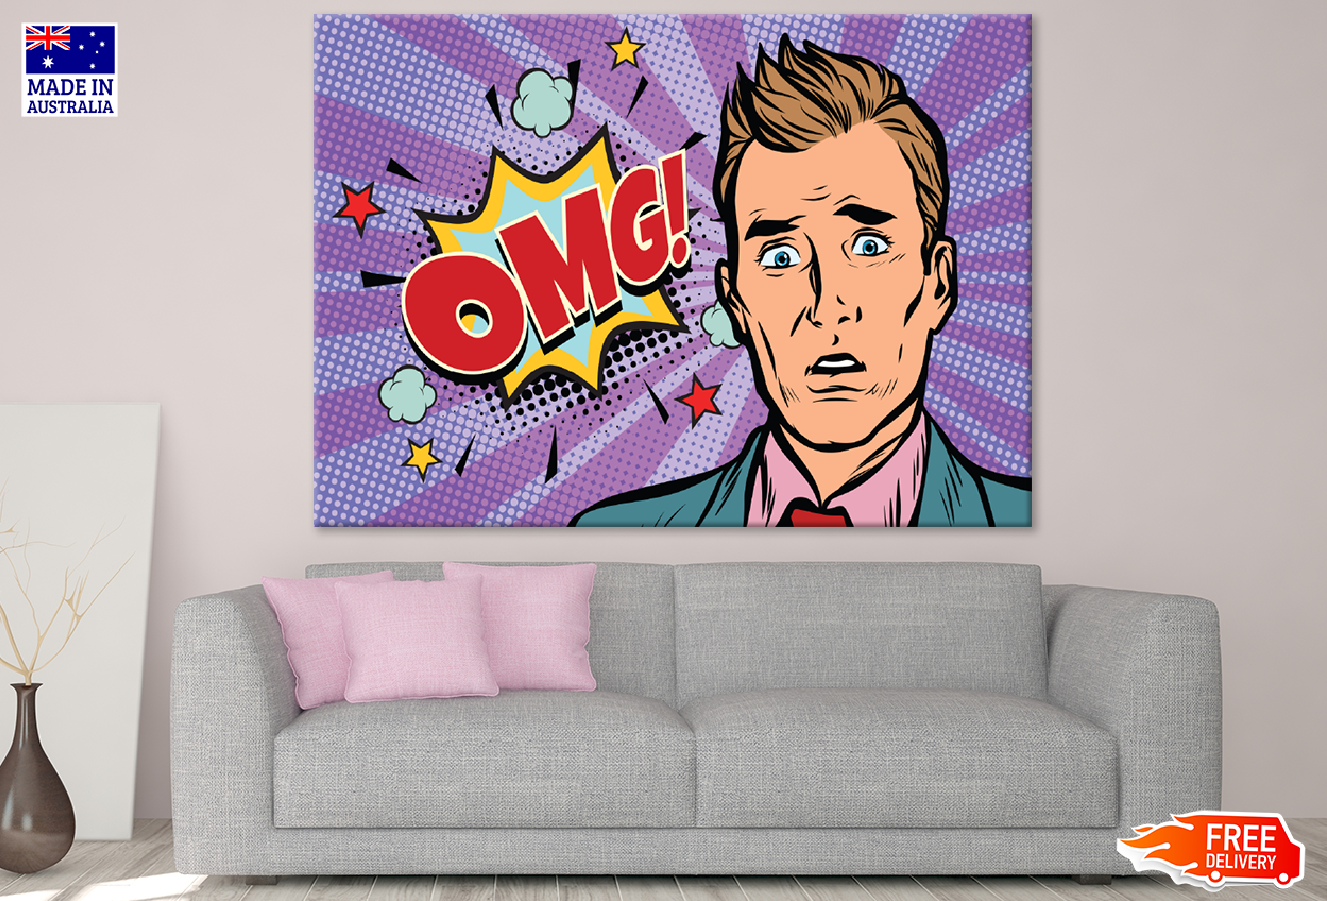 OMG Quote & Confused Man Illustration Print 100% Australian Made